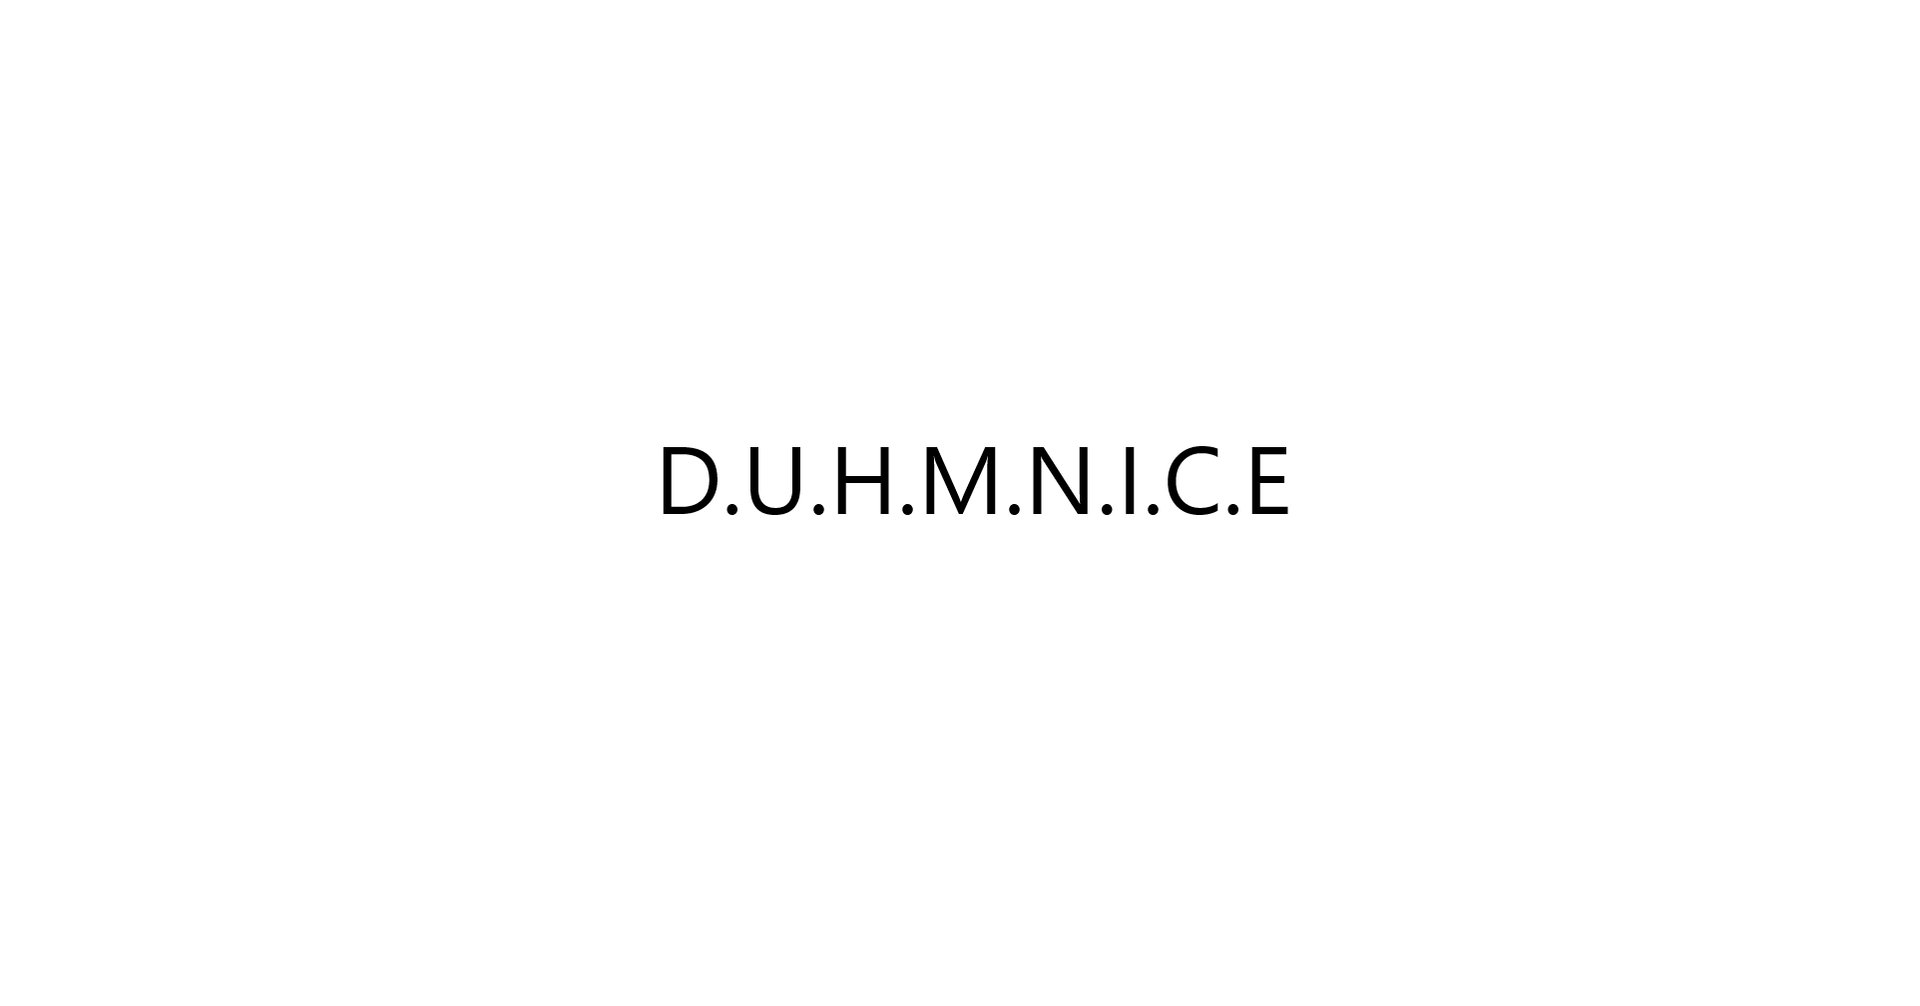 Load video: DUHMNICE VIDEO